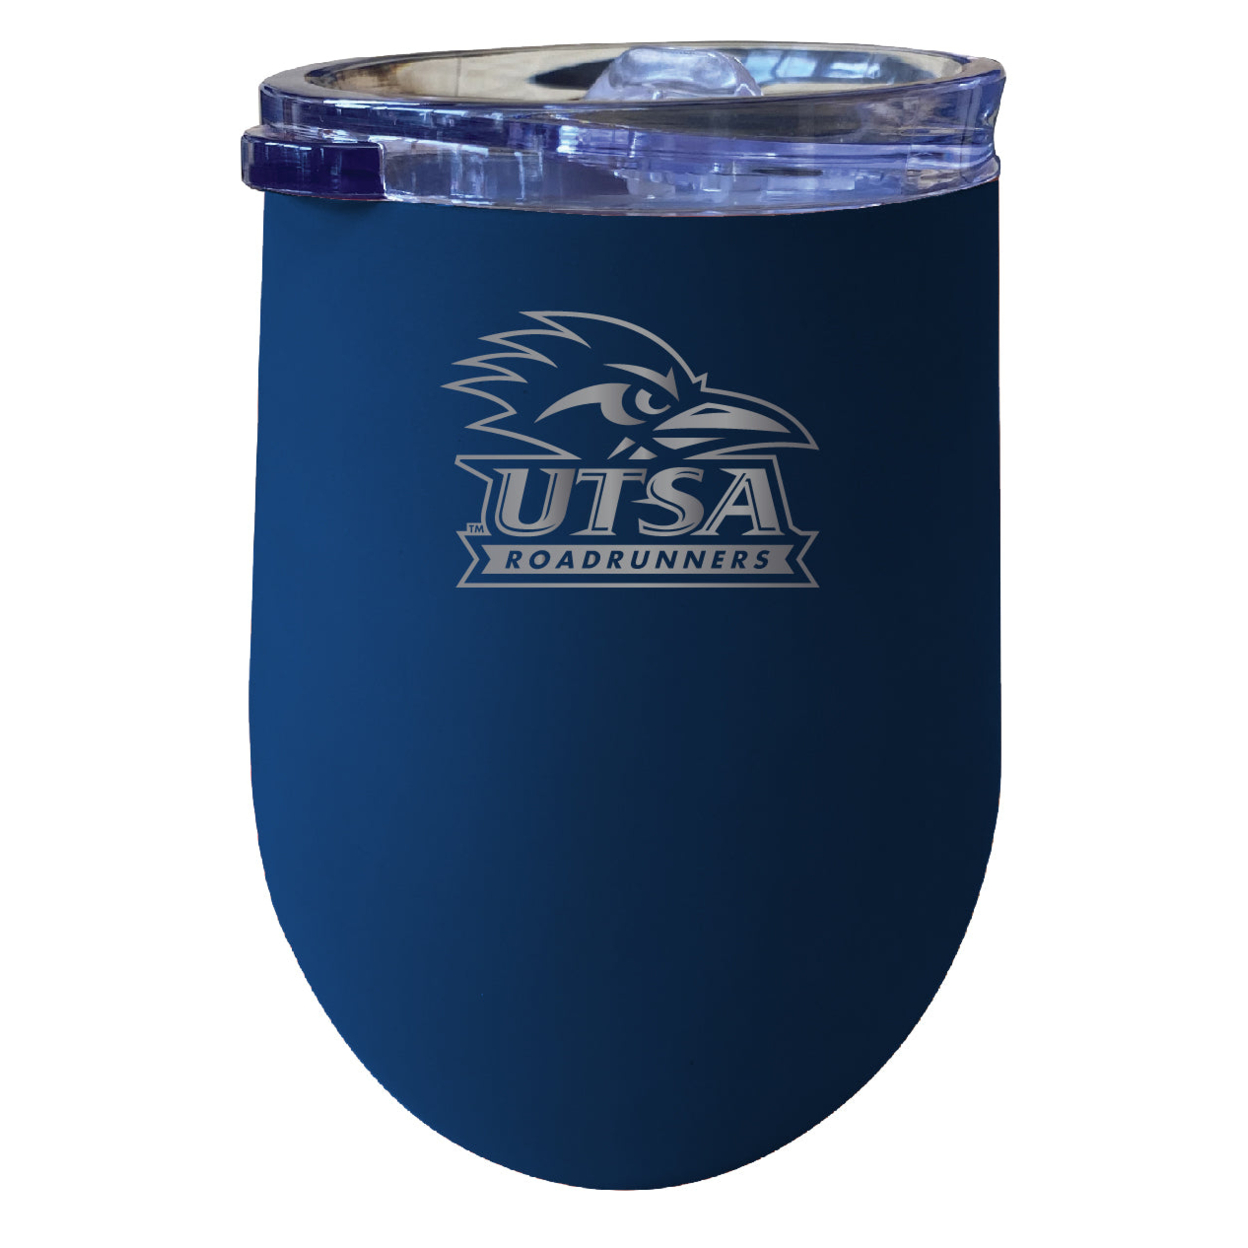 UTSA Road Runners 12 Oz Etched Insulated Wine Stainless Steel Tumbler - Choose Your Color - Coral